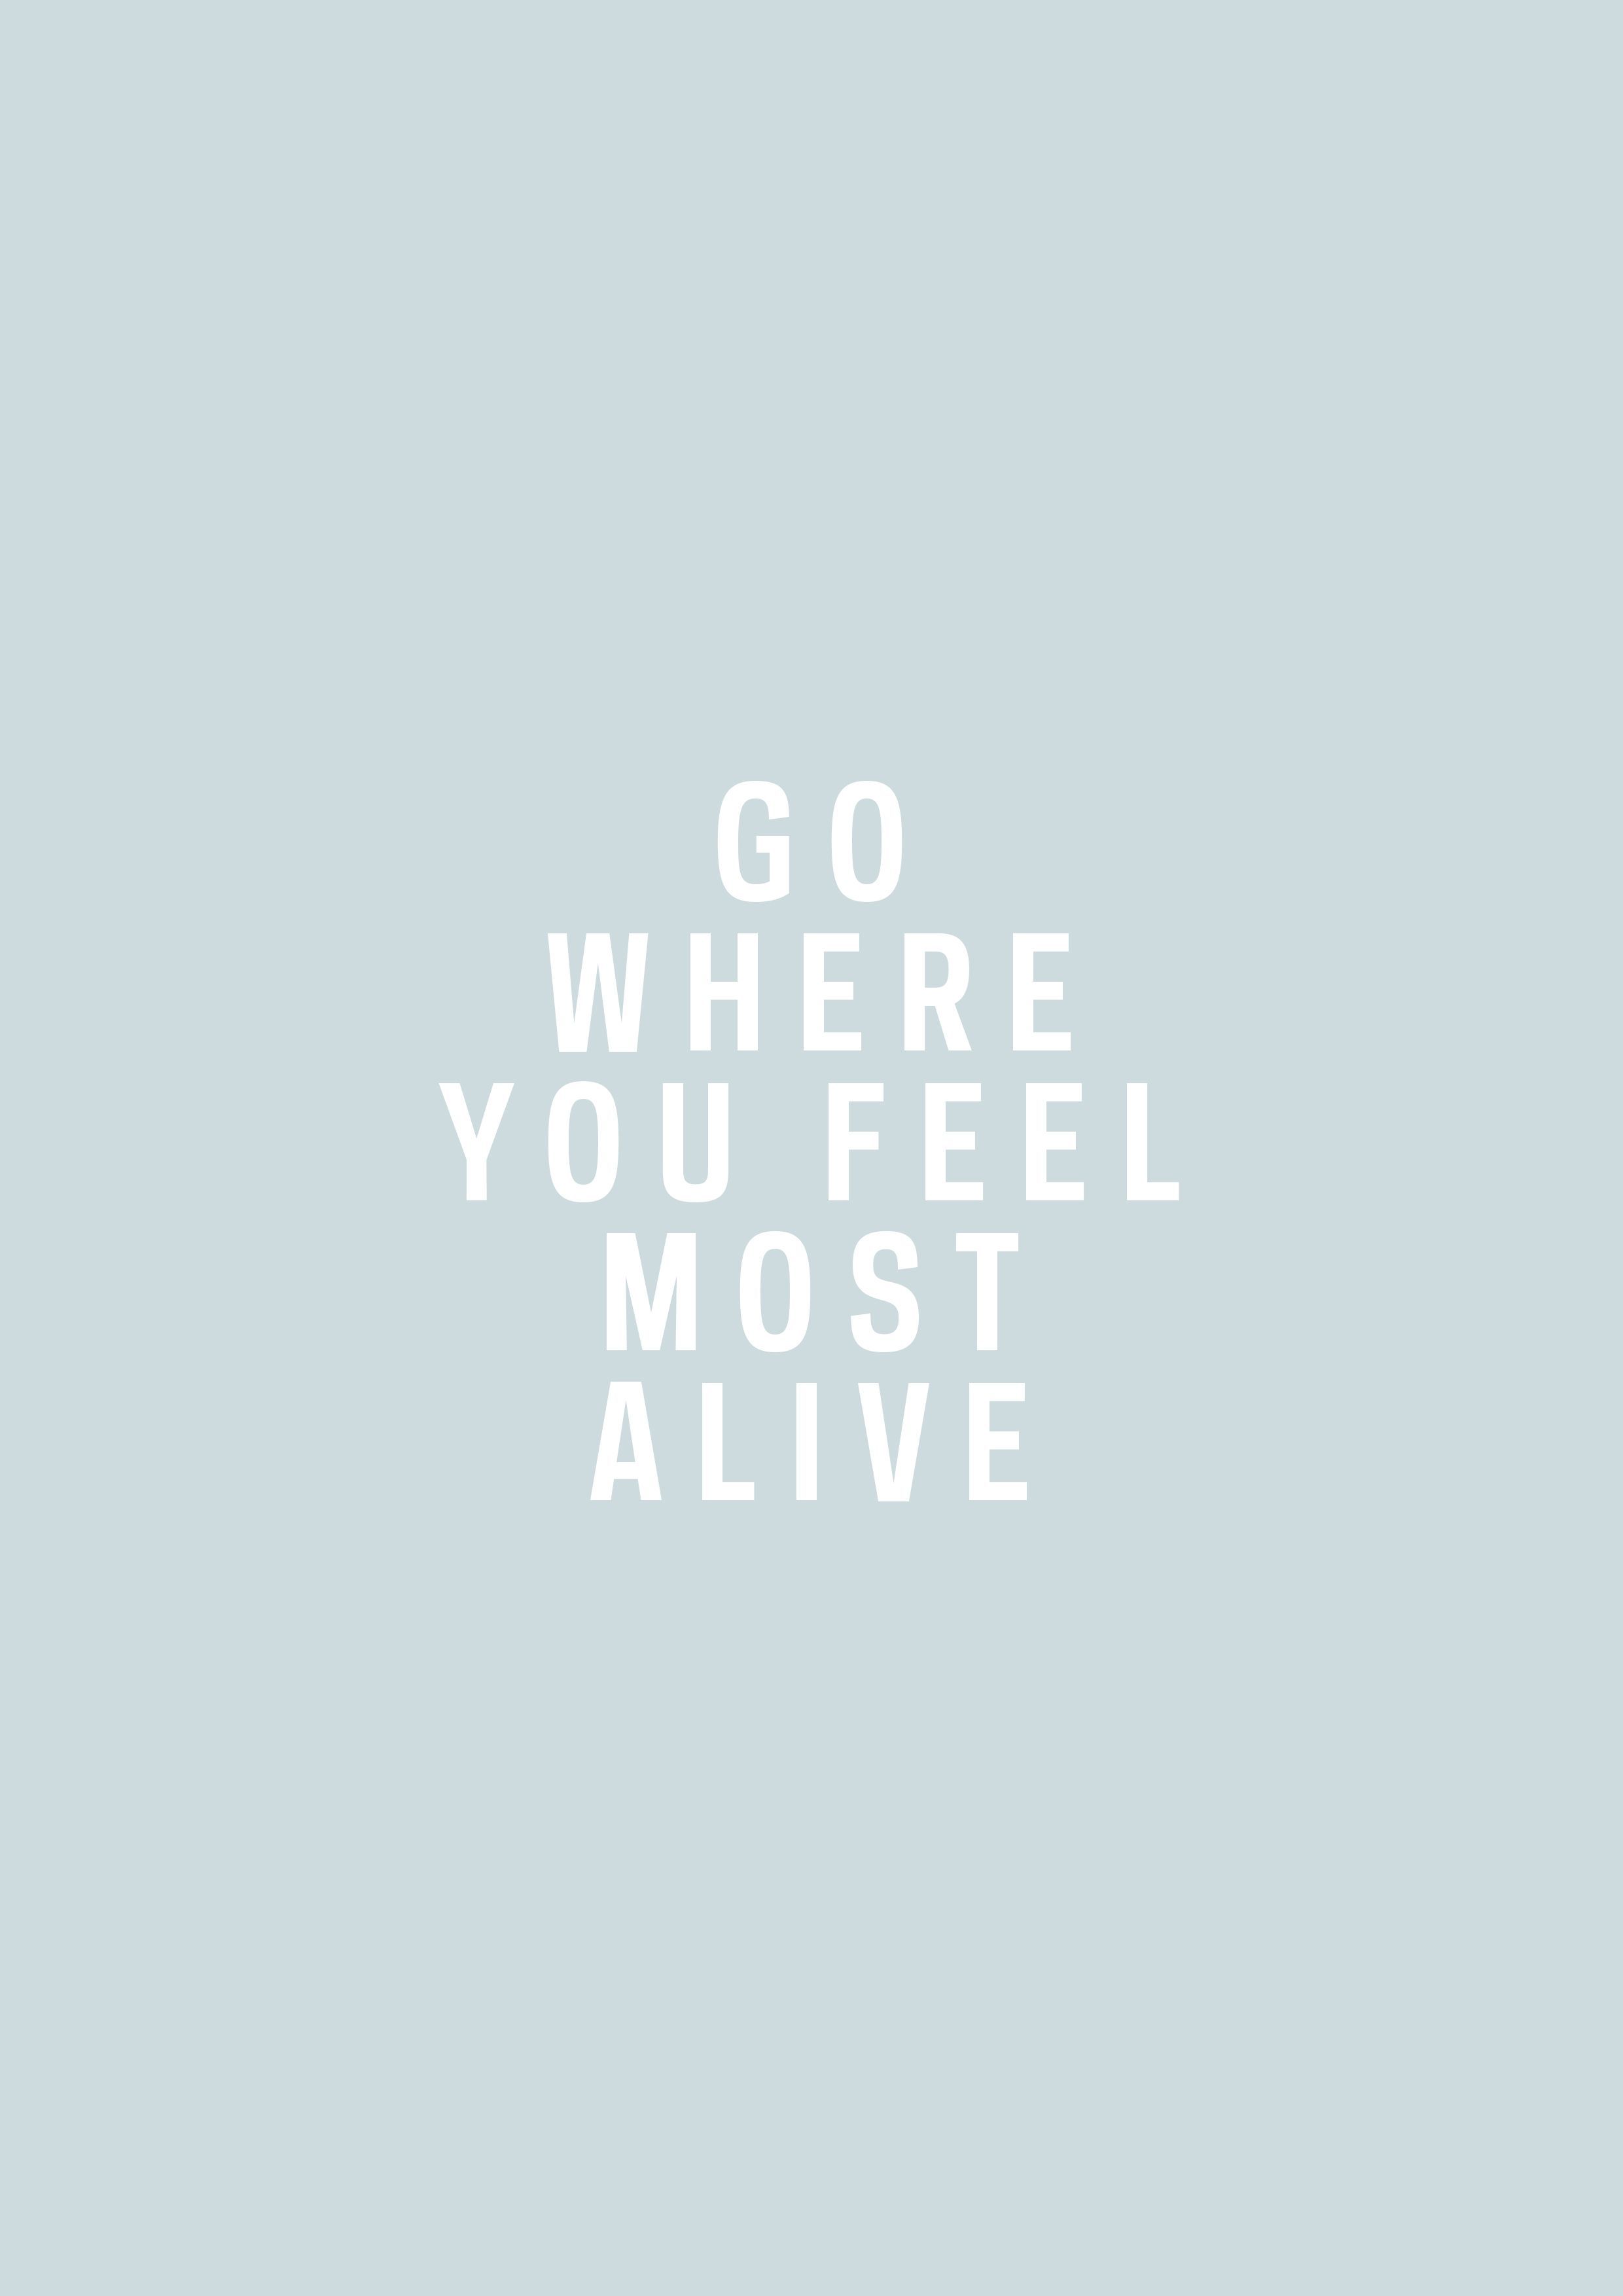 Go where you most feel alive